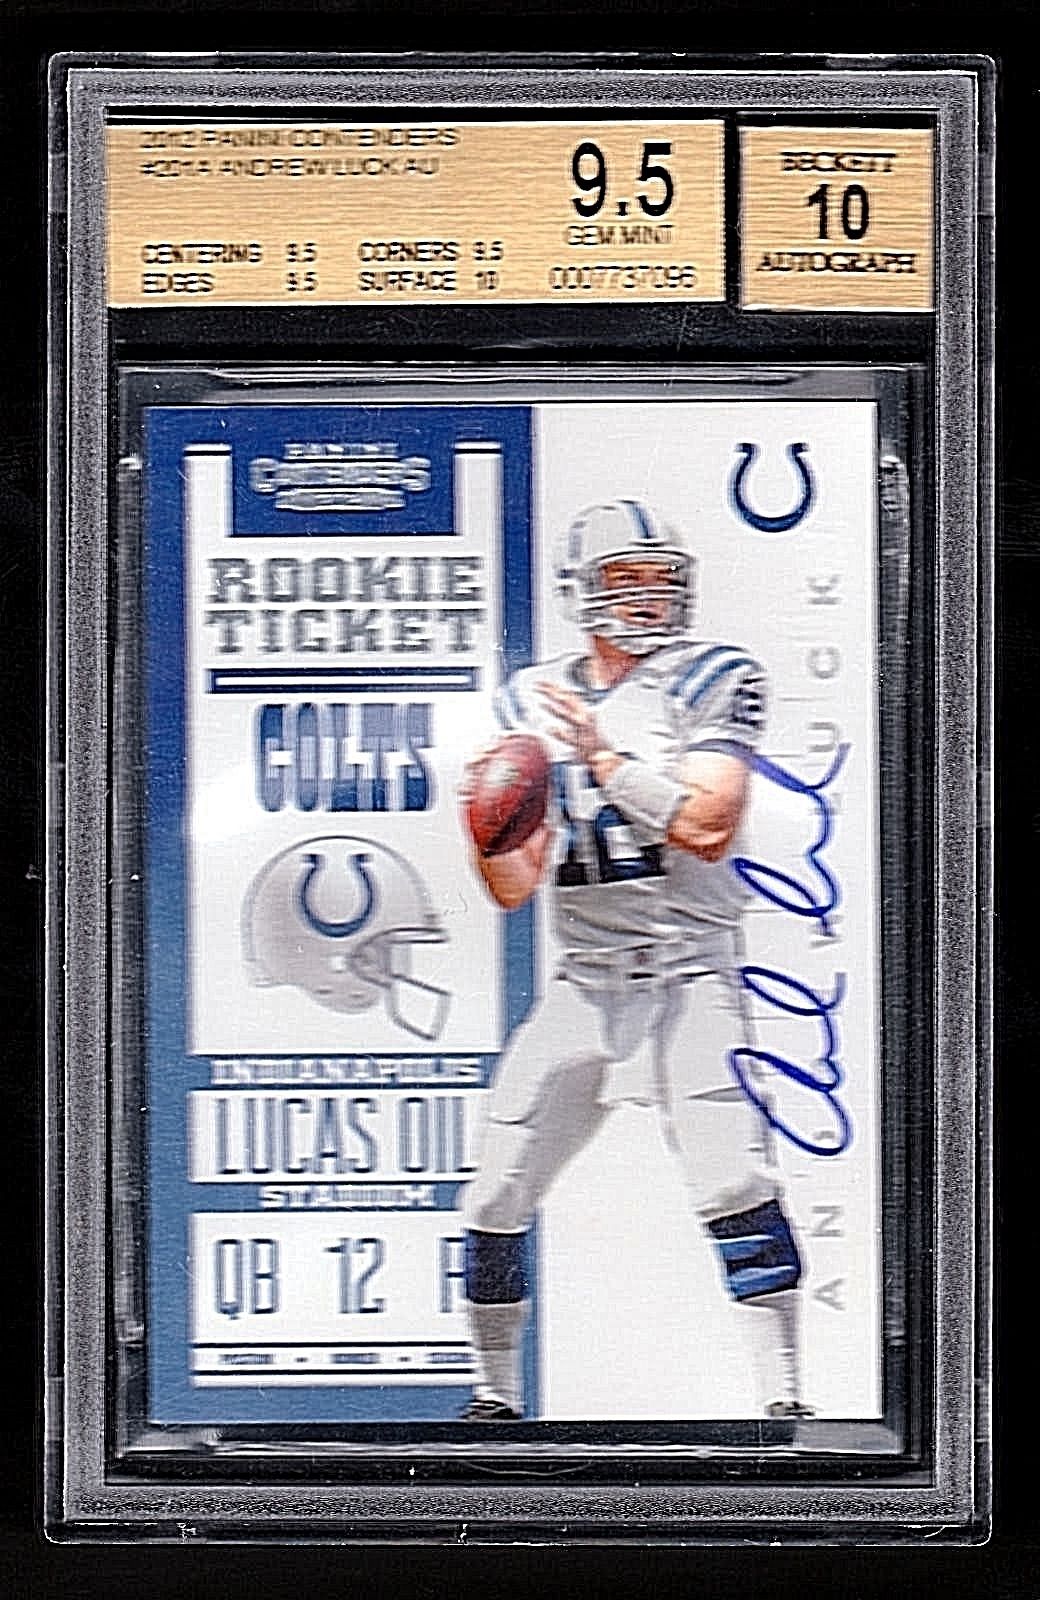 2012 Panini Contenders ANDREW LUCK Auto RC BGS 9510 Gem Mint SP Autograph